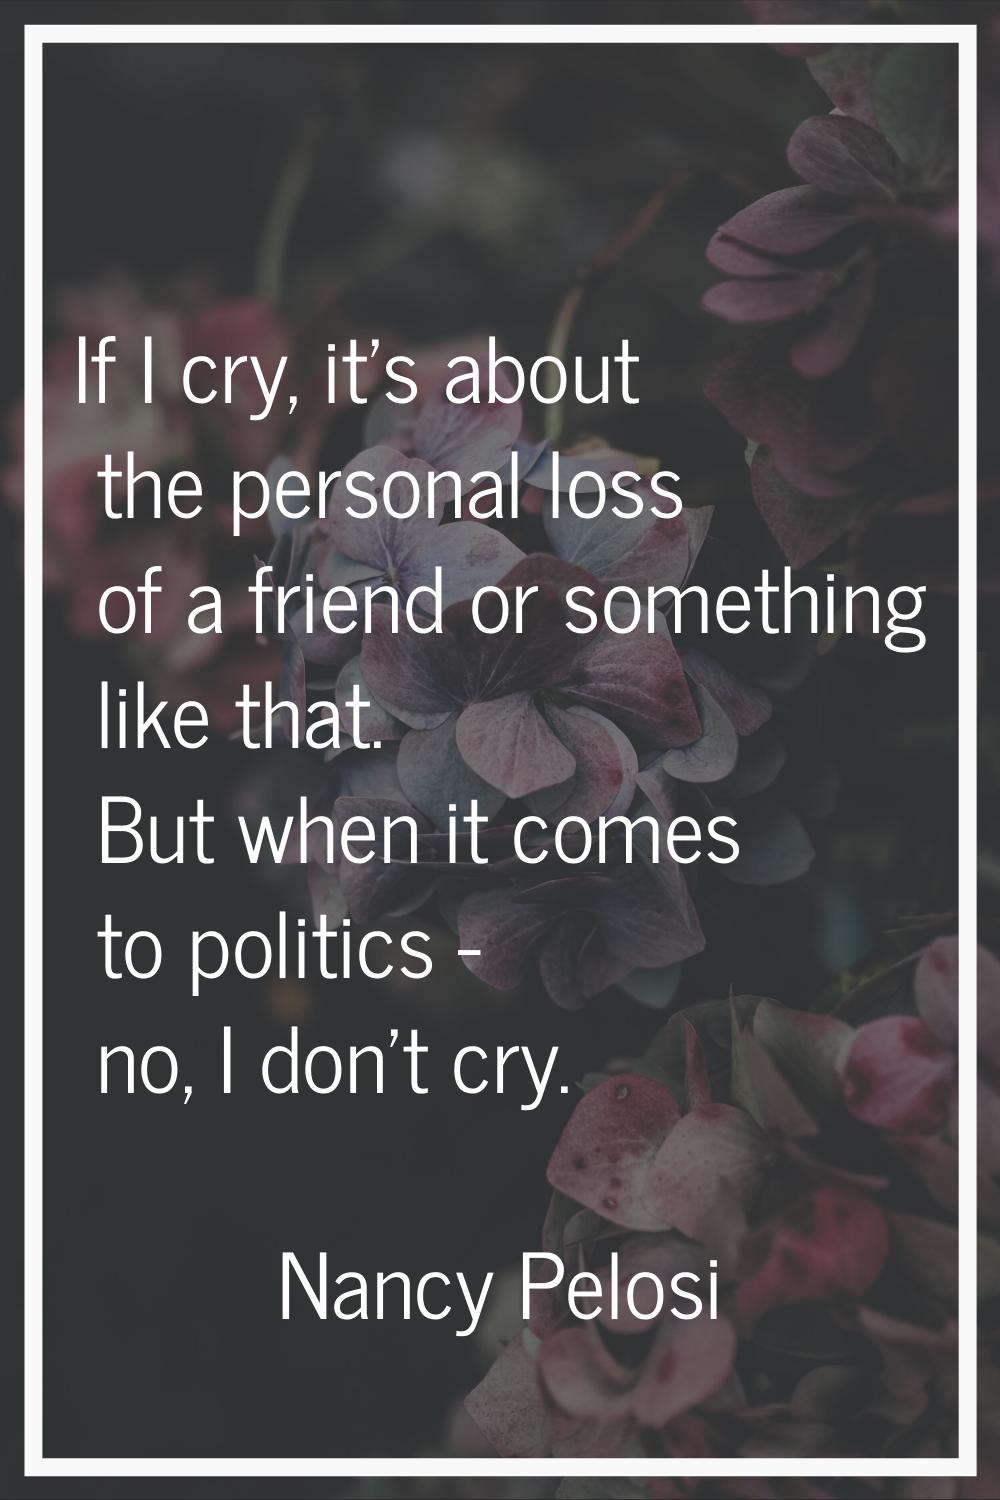 If I cry, it's about the personal loss of a friend or something like that. But when it comes to pol